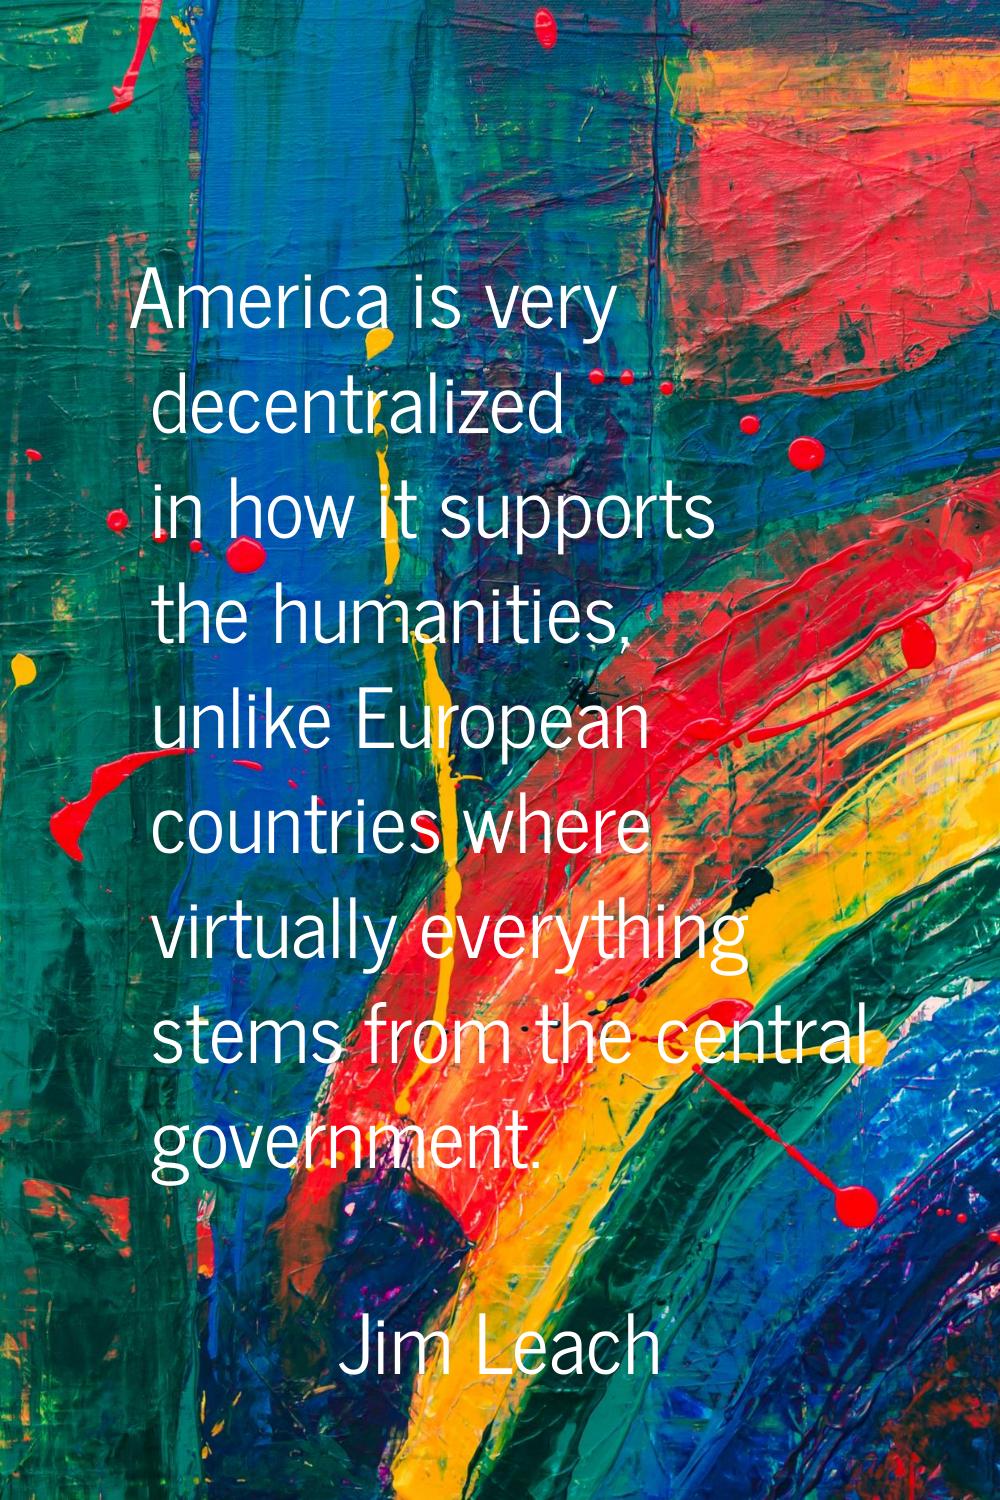 America is very decentralized in how it supports the humanities, unlike European countries where vi